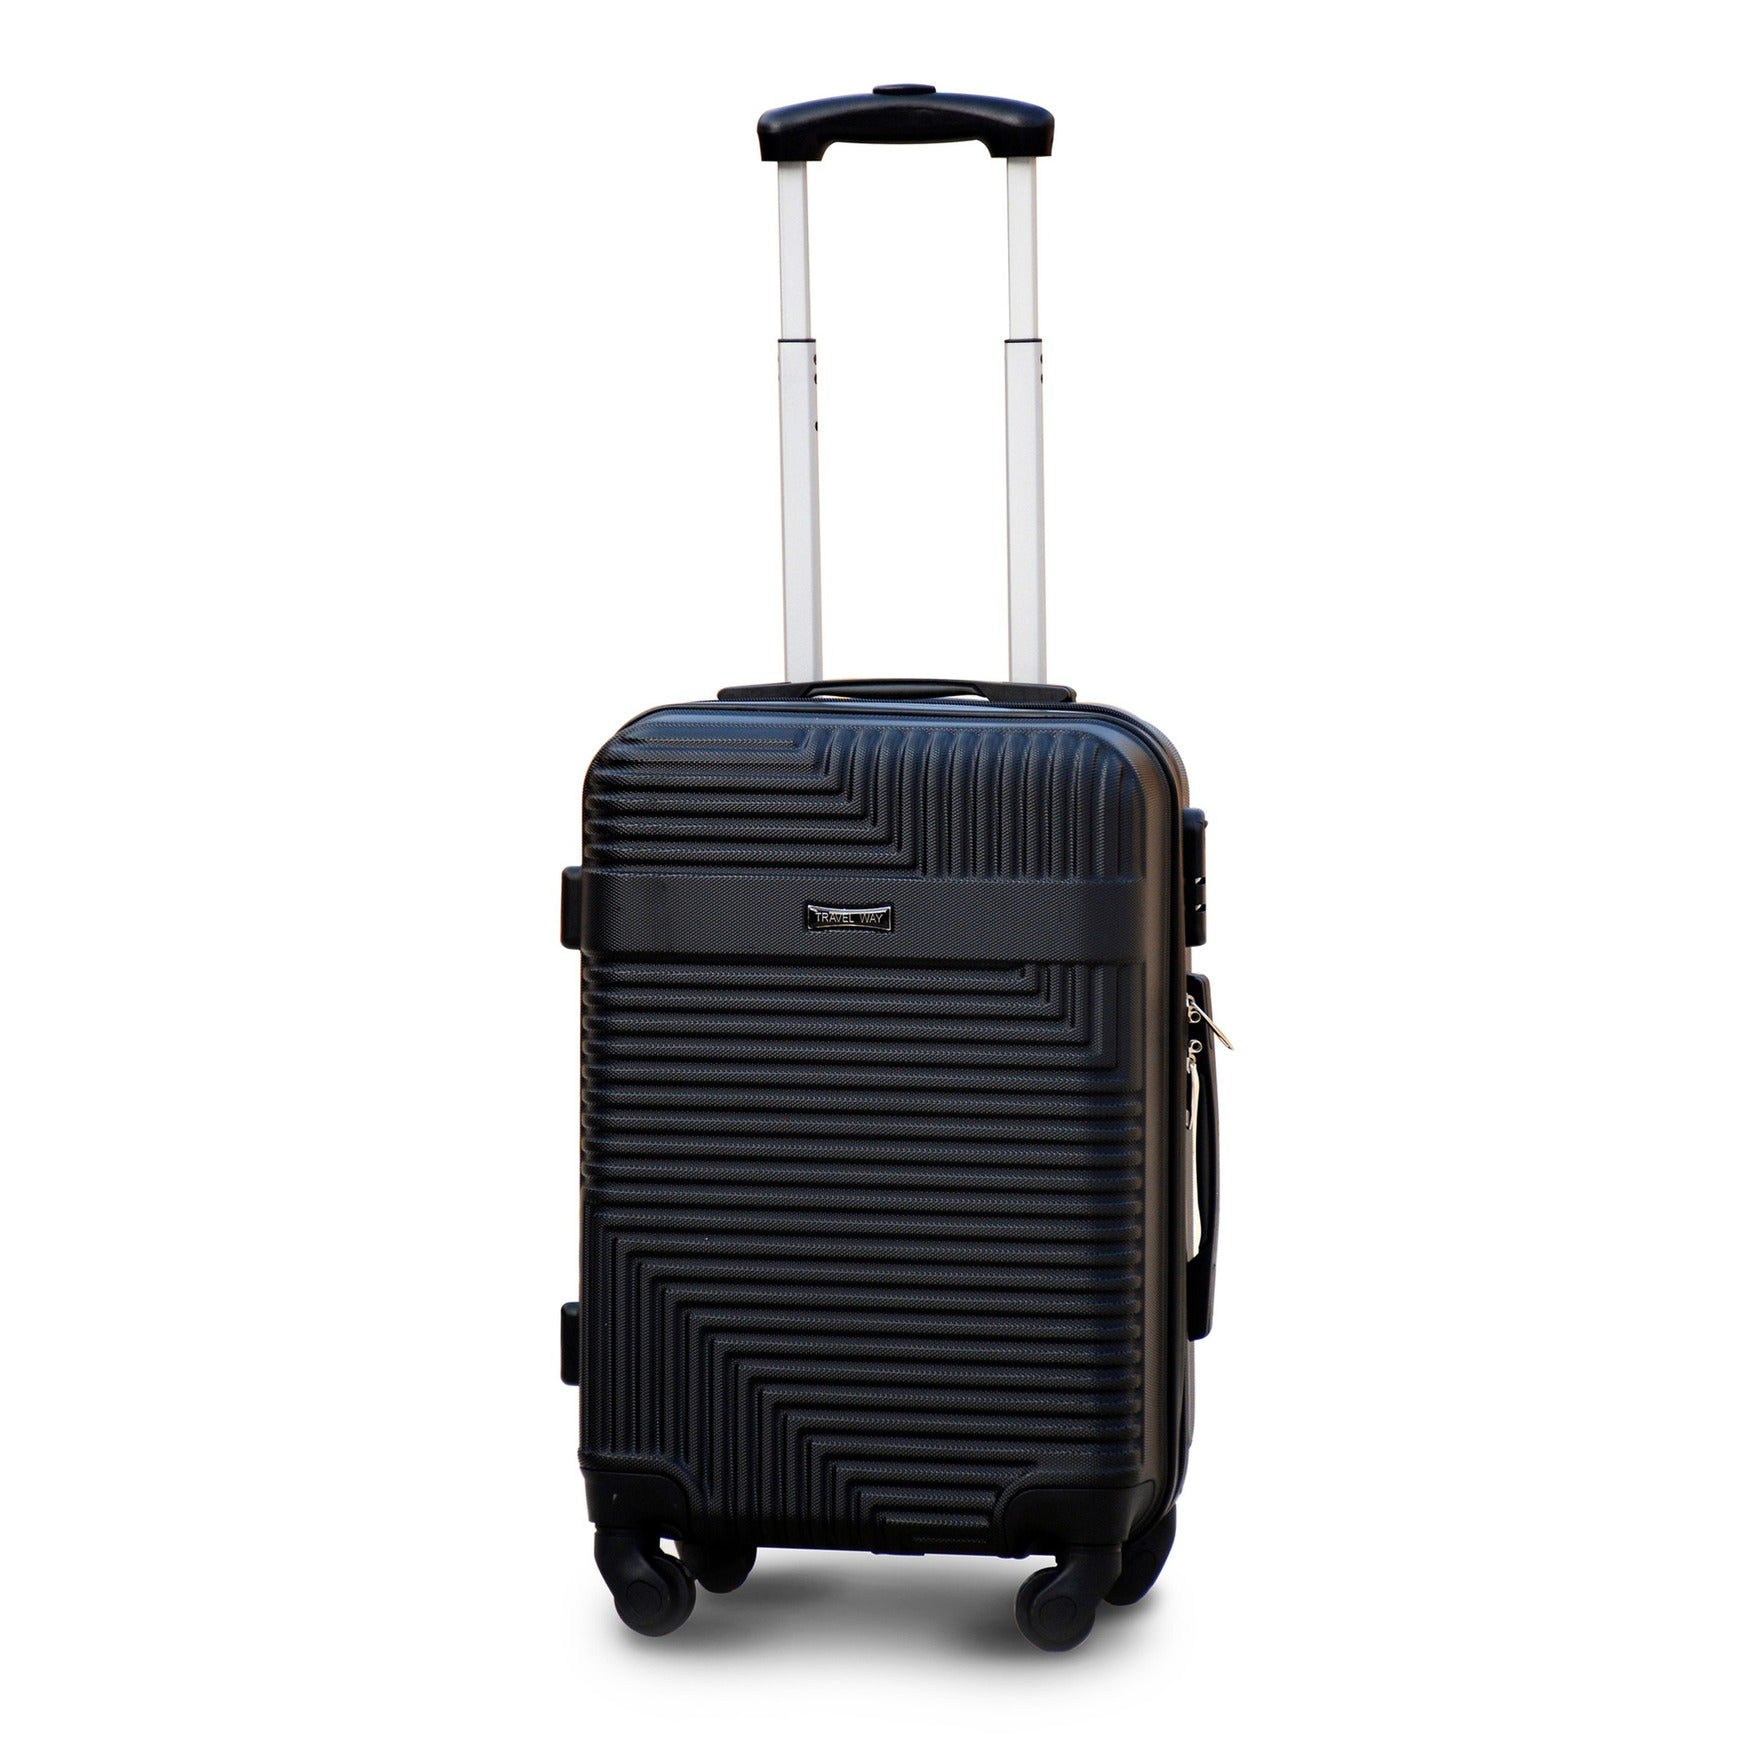 20" Black Colour Travel Way ABS Luggage Lightweight Hard Case Carry On Spinner Wheel Trolley Bag